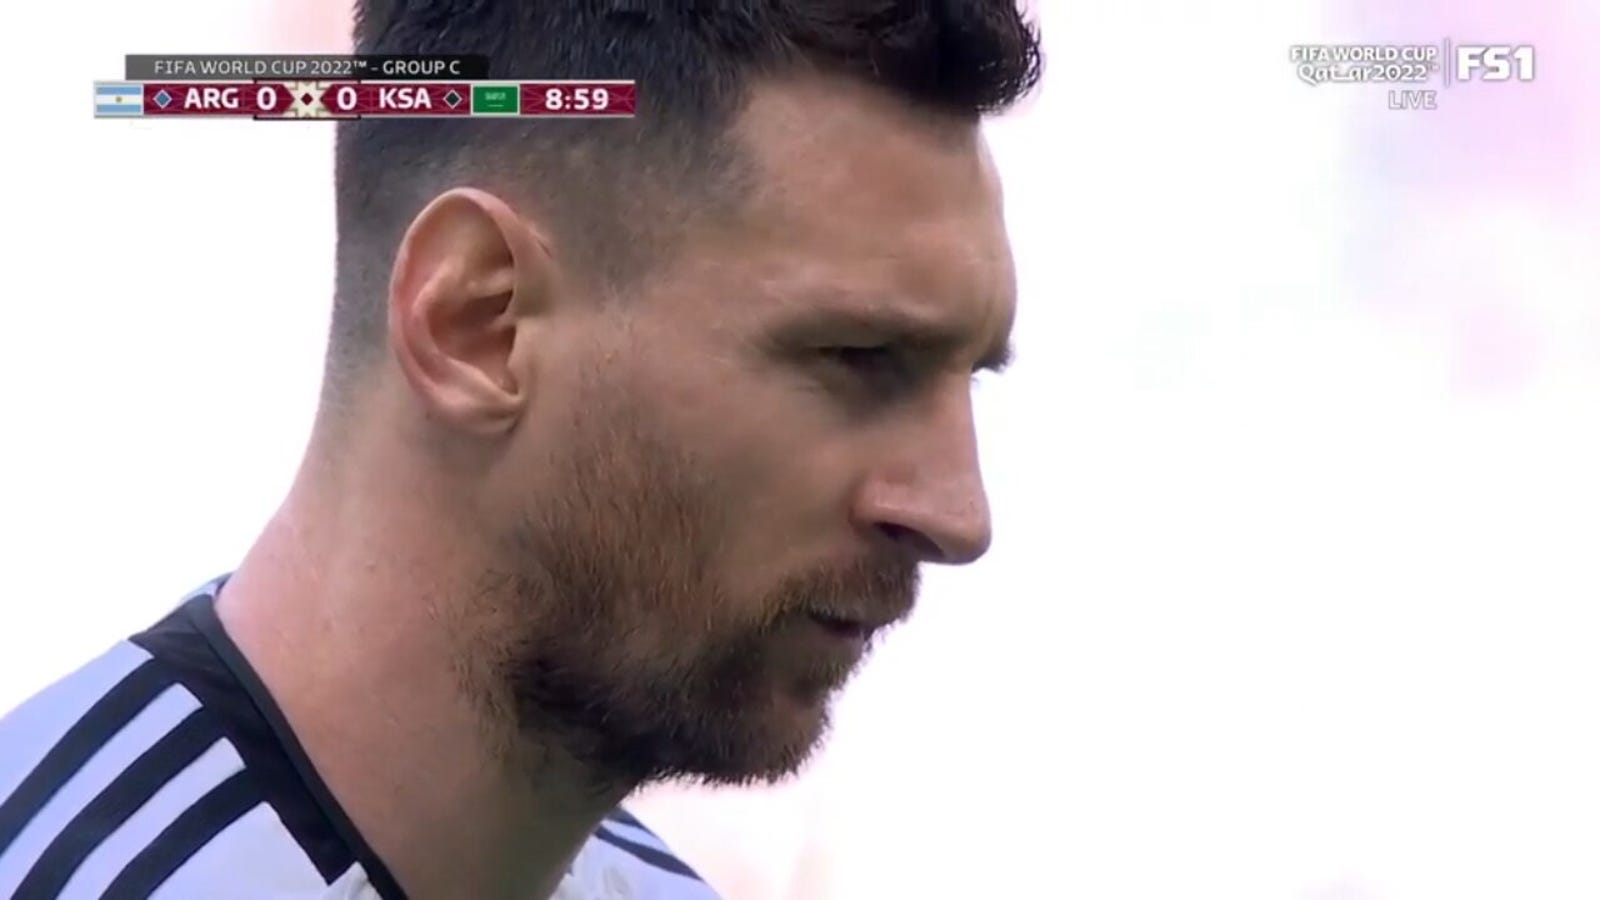 Lionel Messi scores a PK in the 10th minute for Argentina to take a 1-0 lead over Saudi Arabia